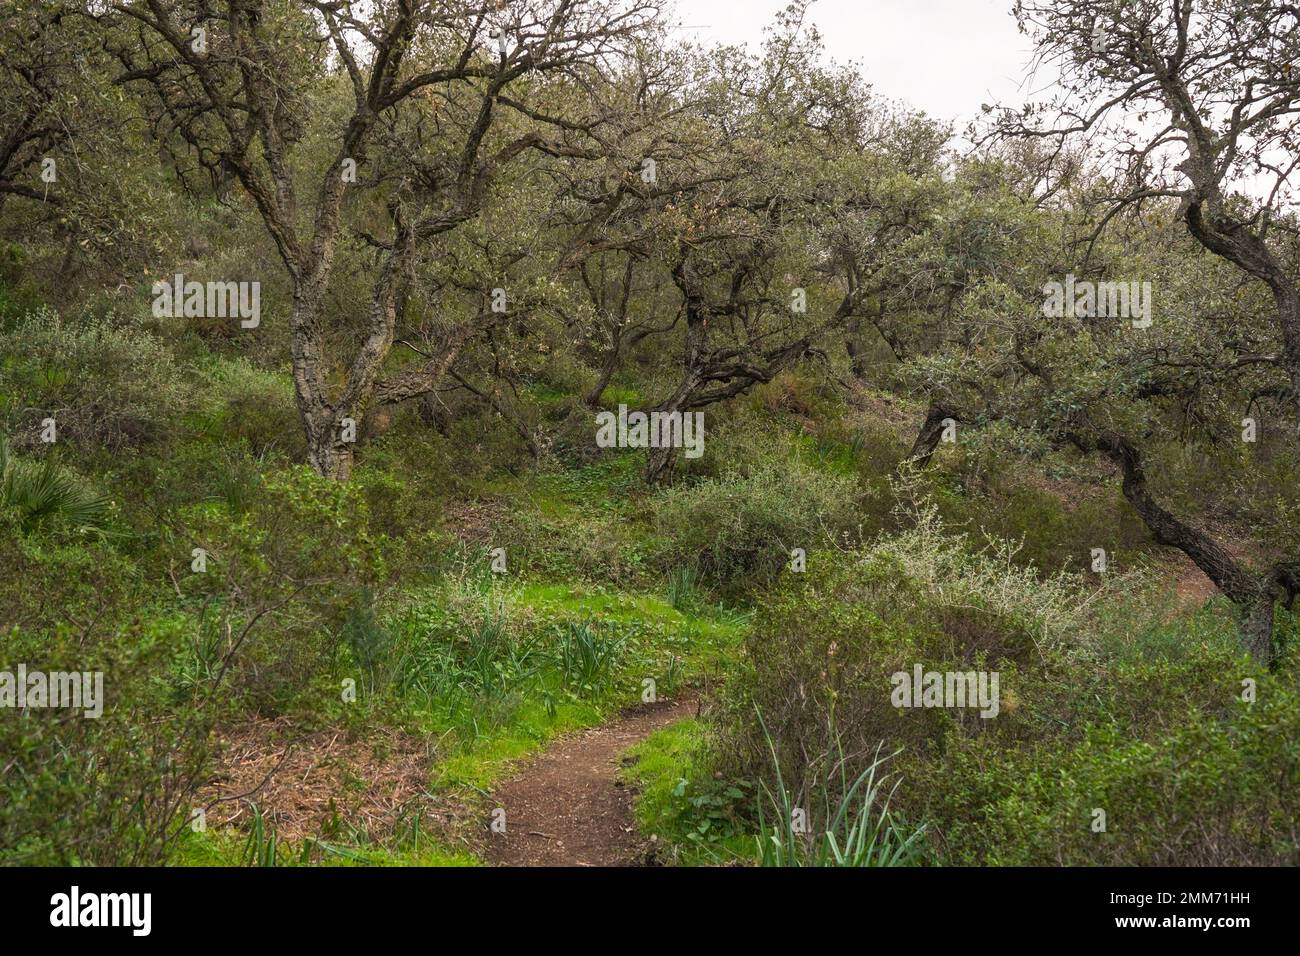 Trail going through dense wood, young cork oak trees in forest in Andalusia, Spain. Stock Photo